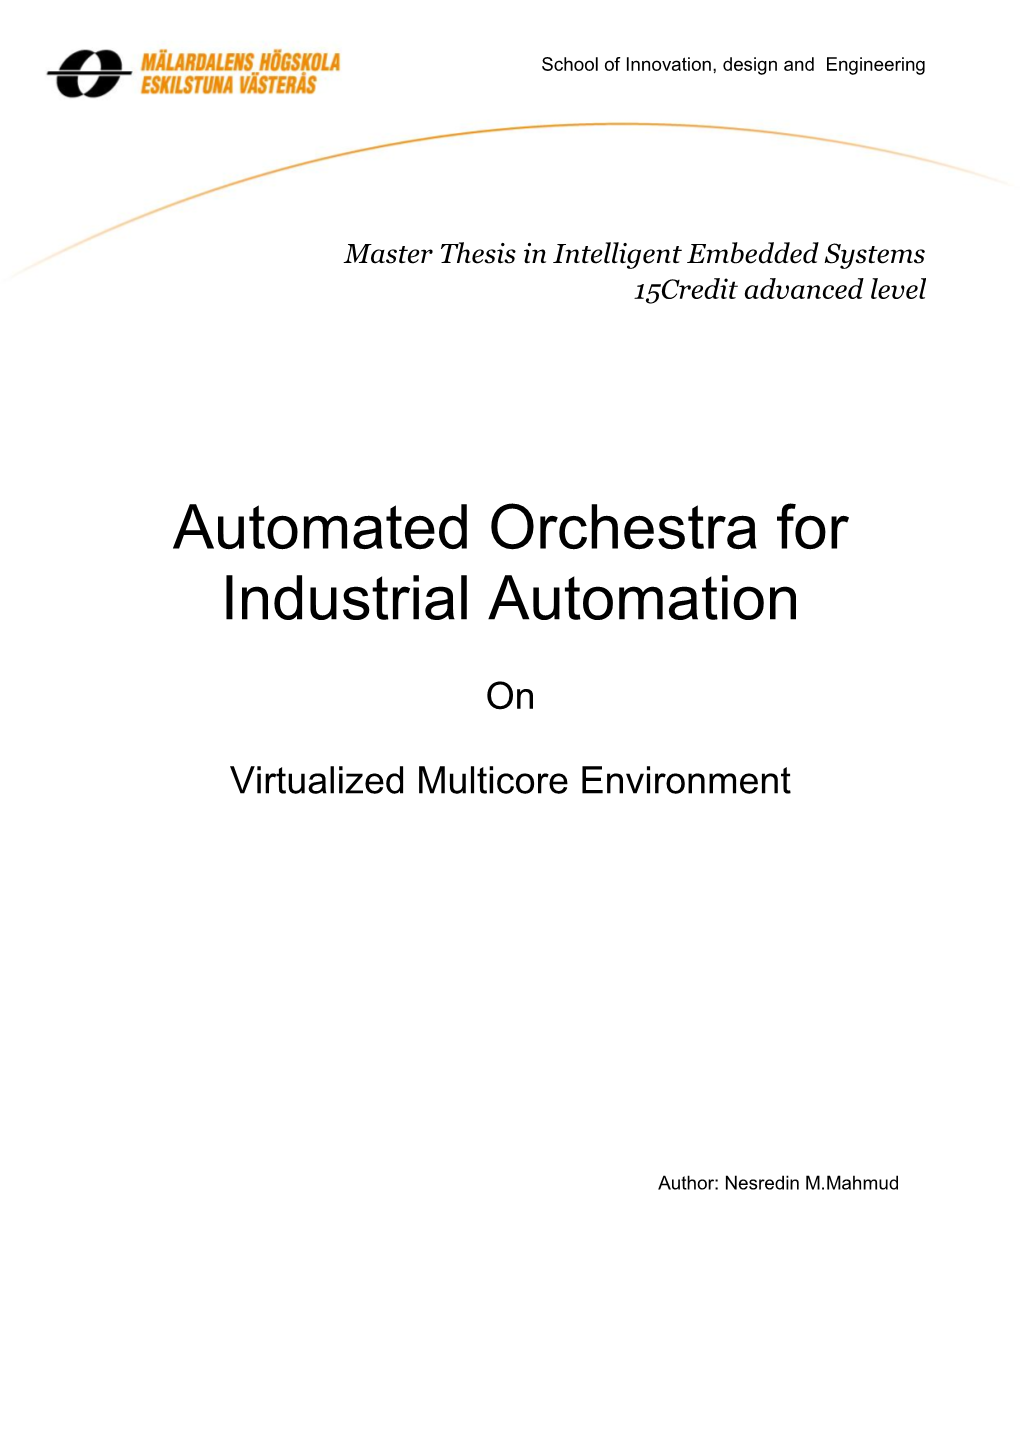 Automated Orchestra for Industrial Automation